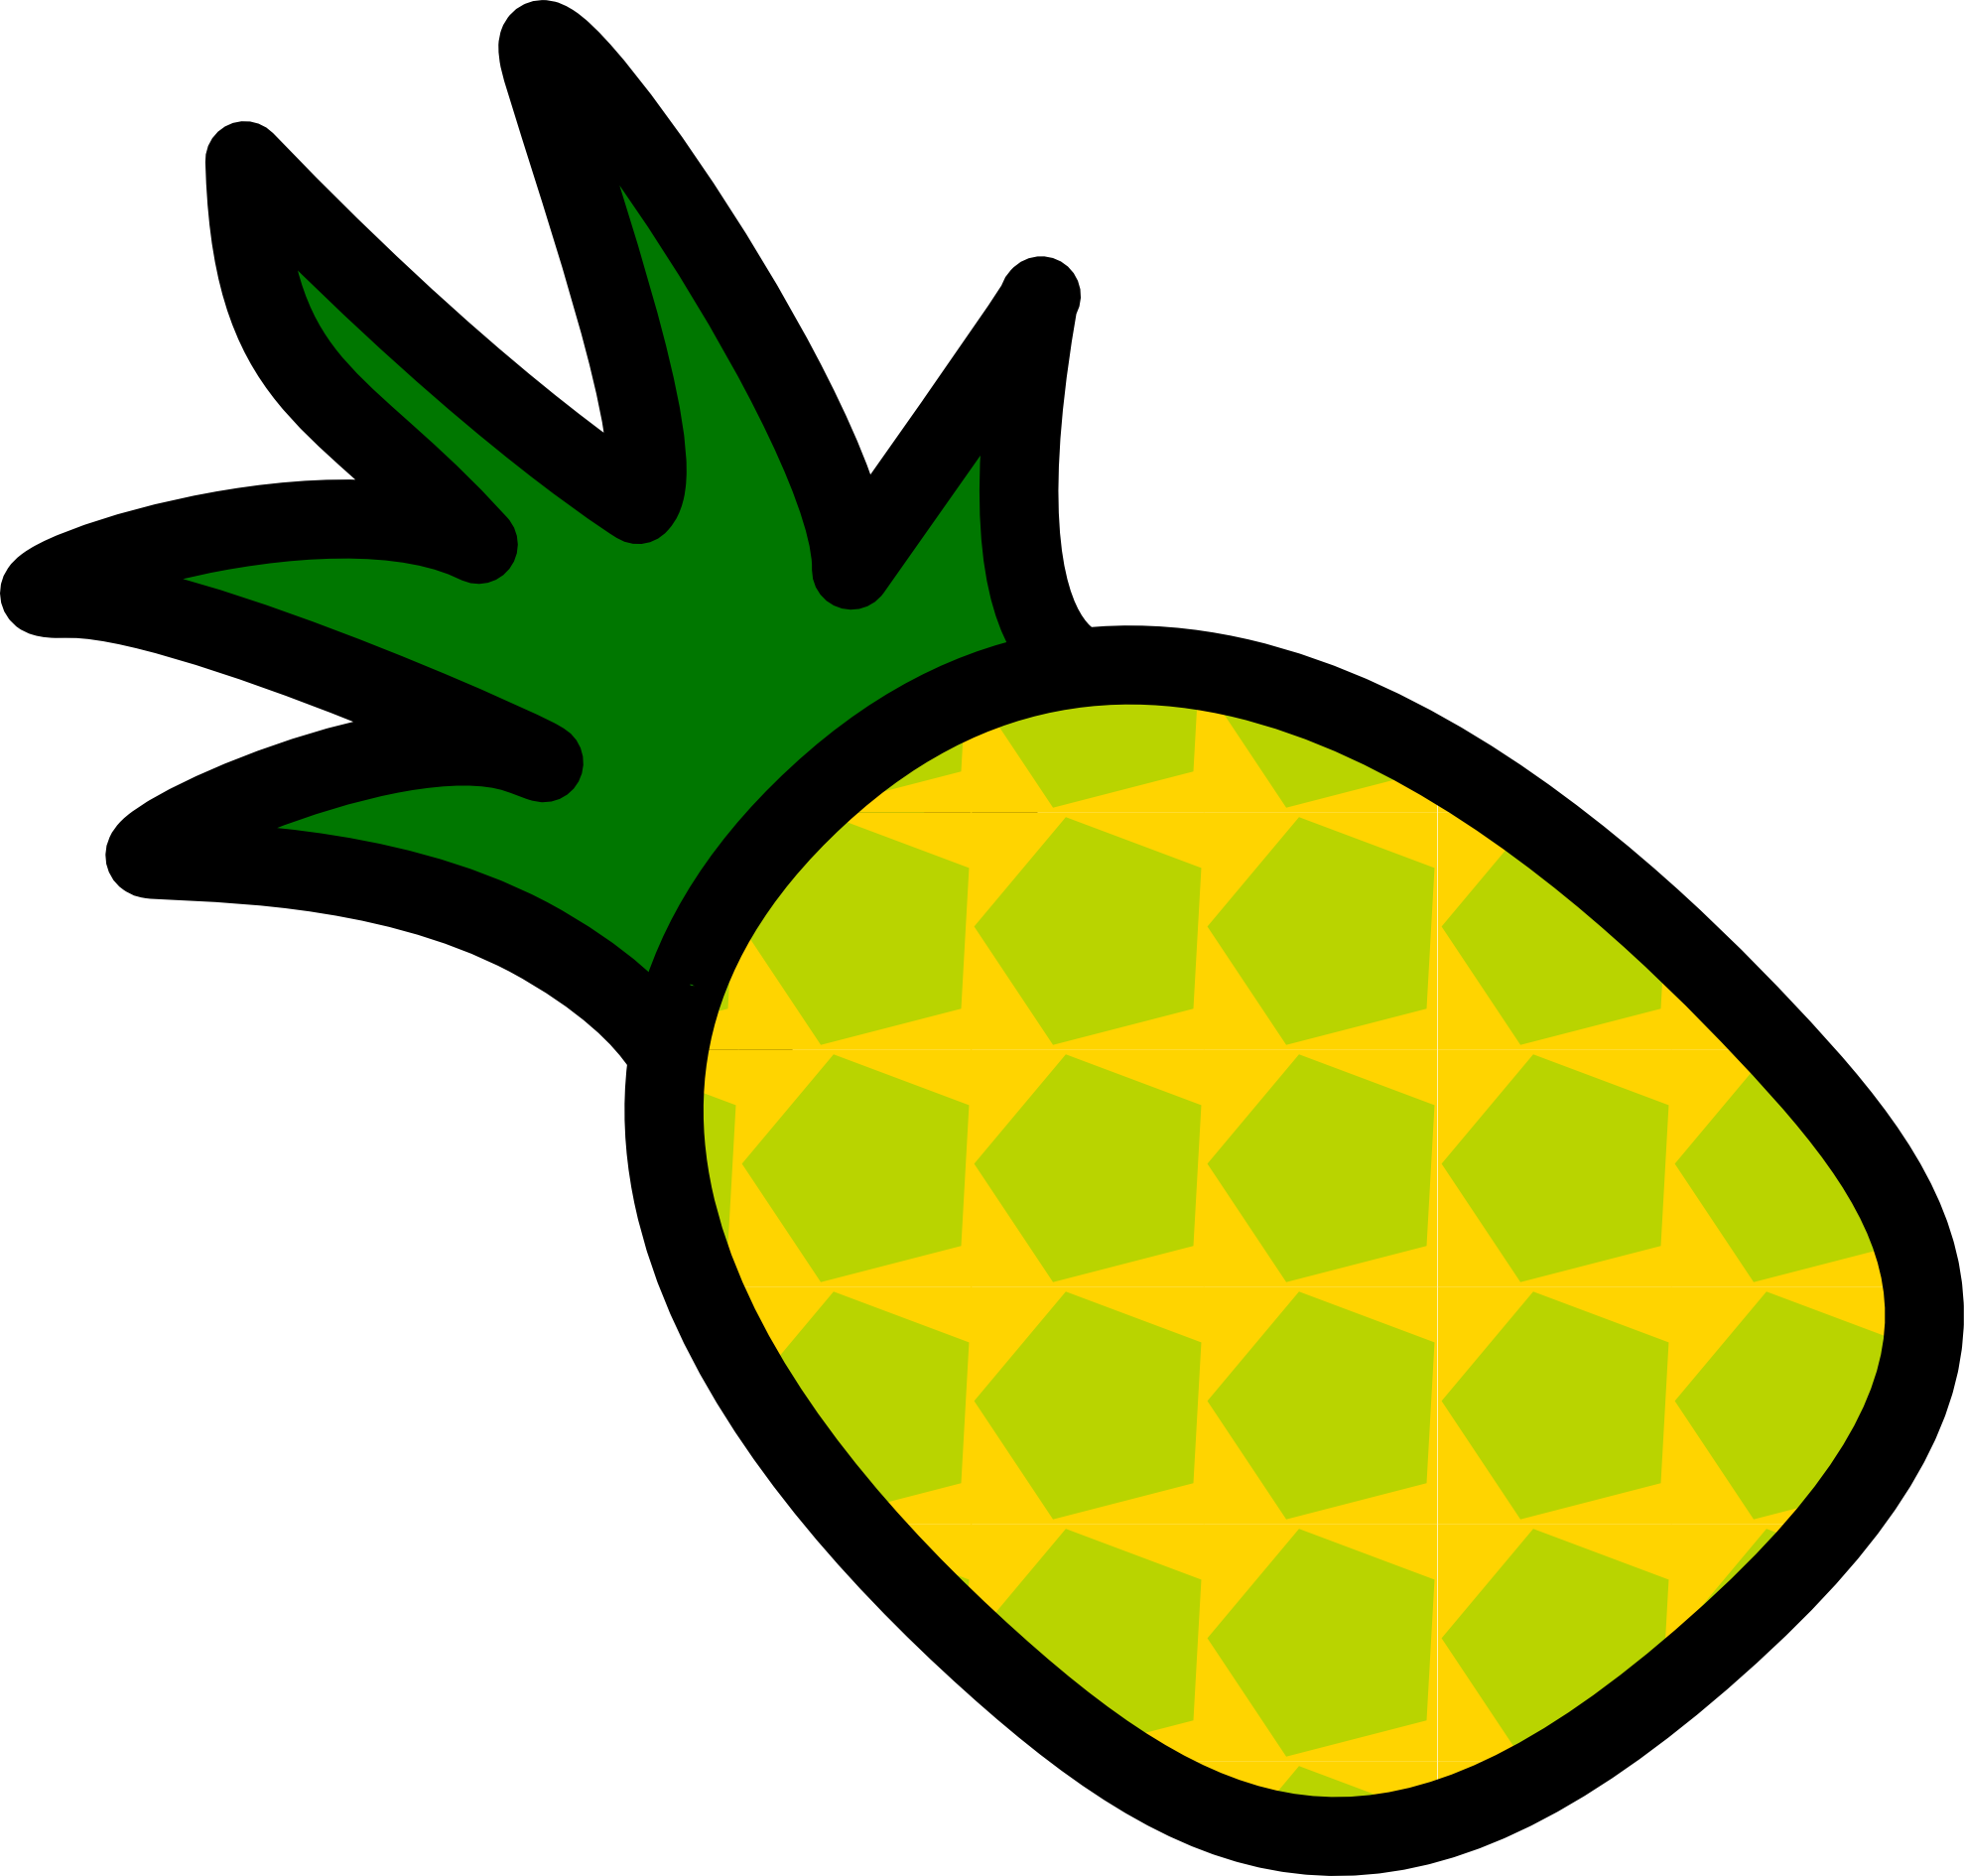 Pineapple Vector Png | Clipart Panda - Free Clipart Images